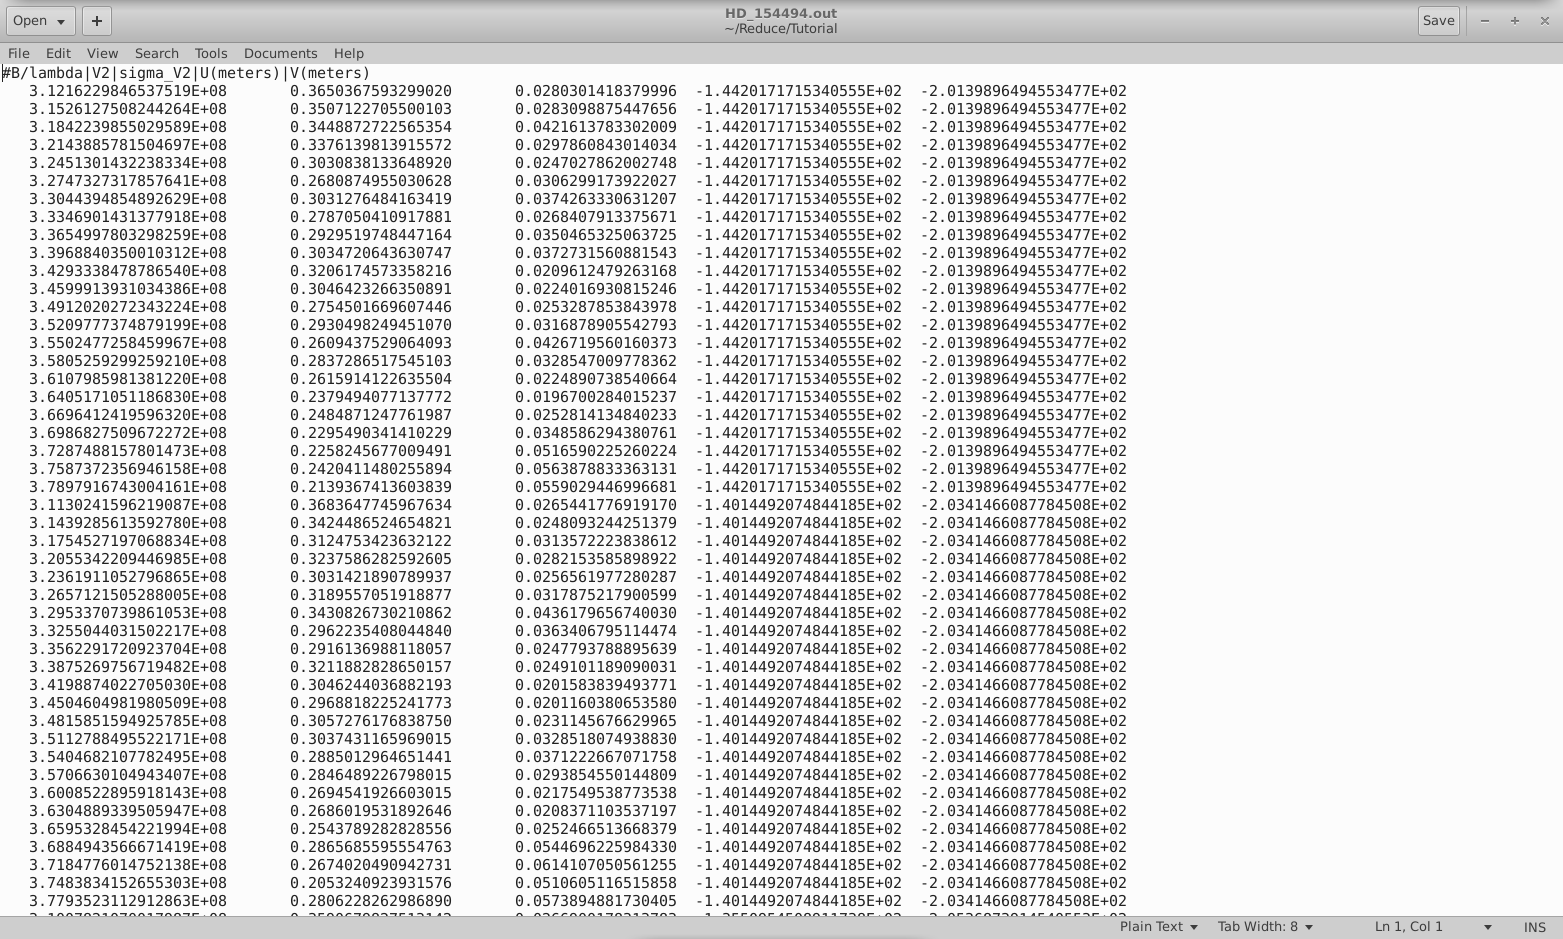 The text file output by l1_l2_gui.